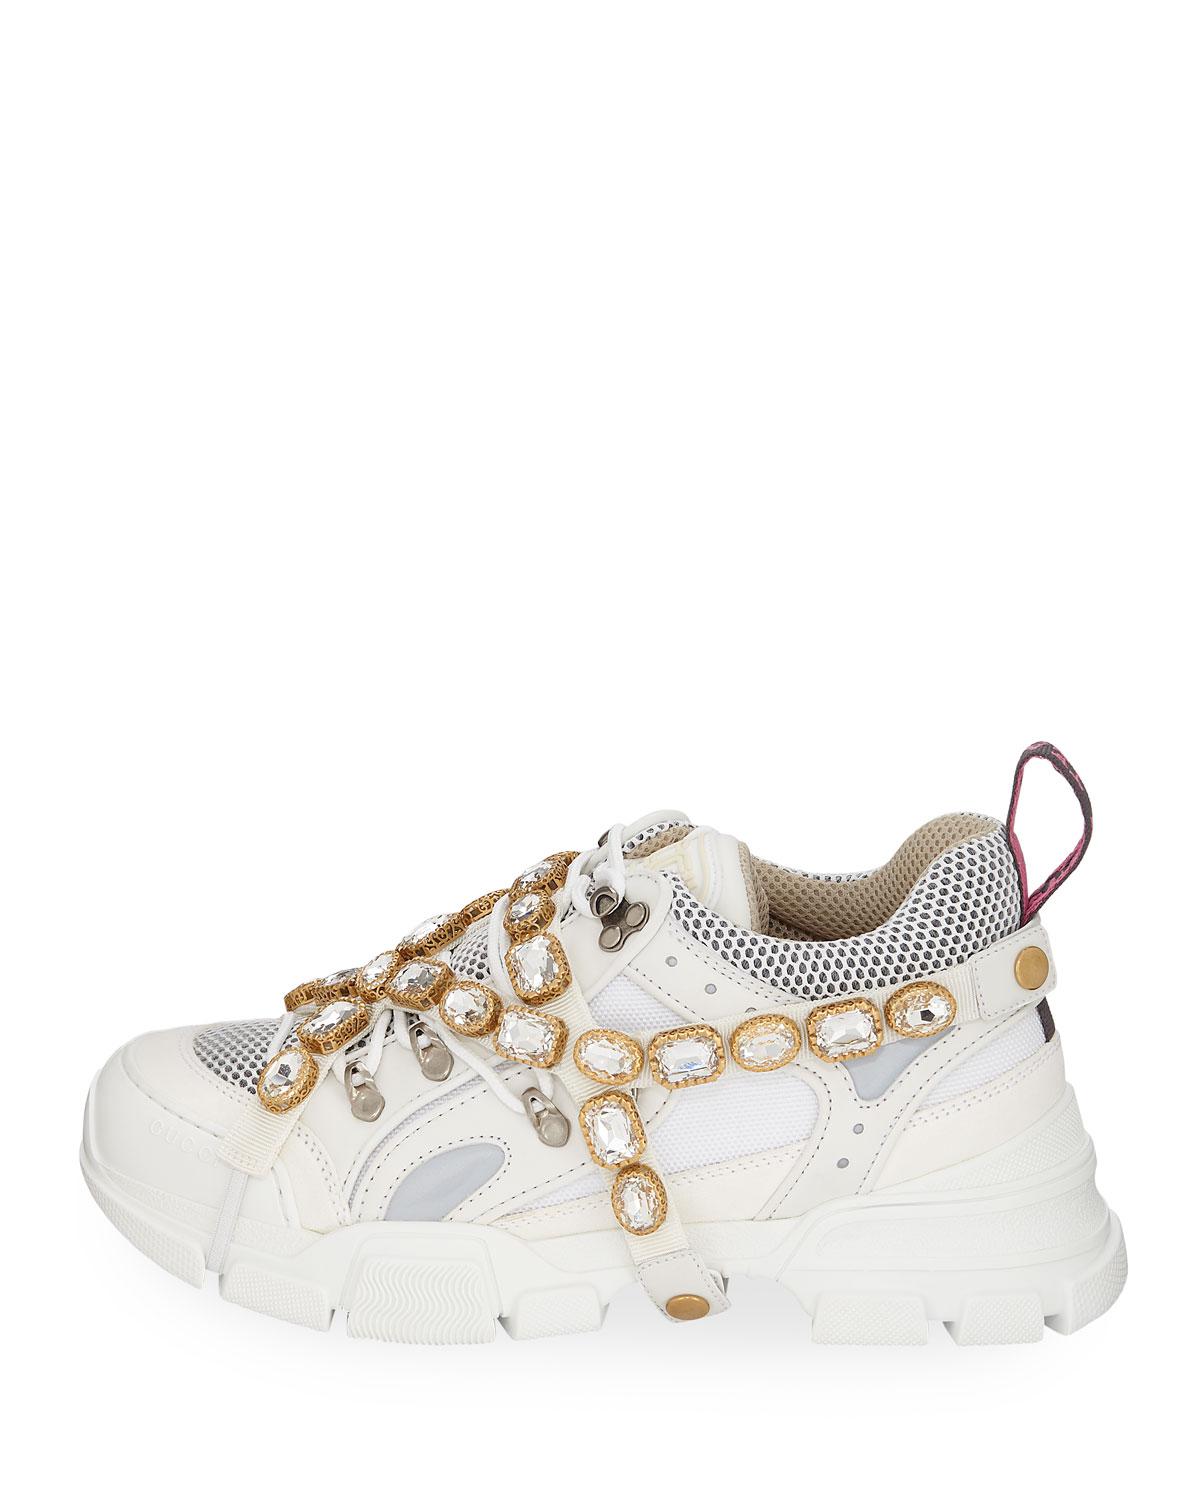 Gucci F/W18 Journey Sneakers - BAGAHOLICBOY